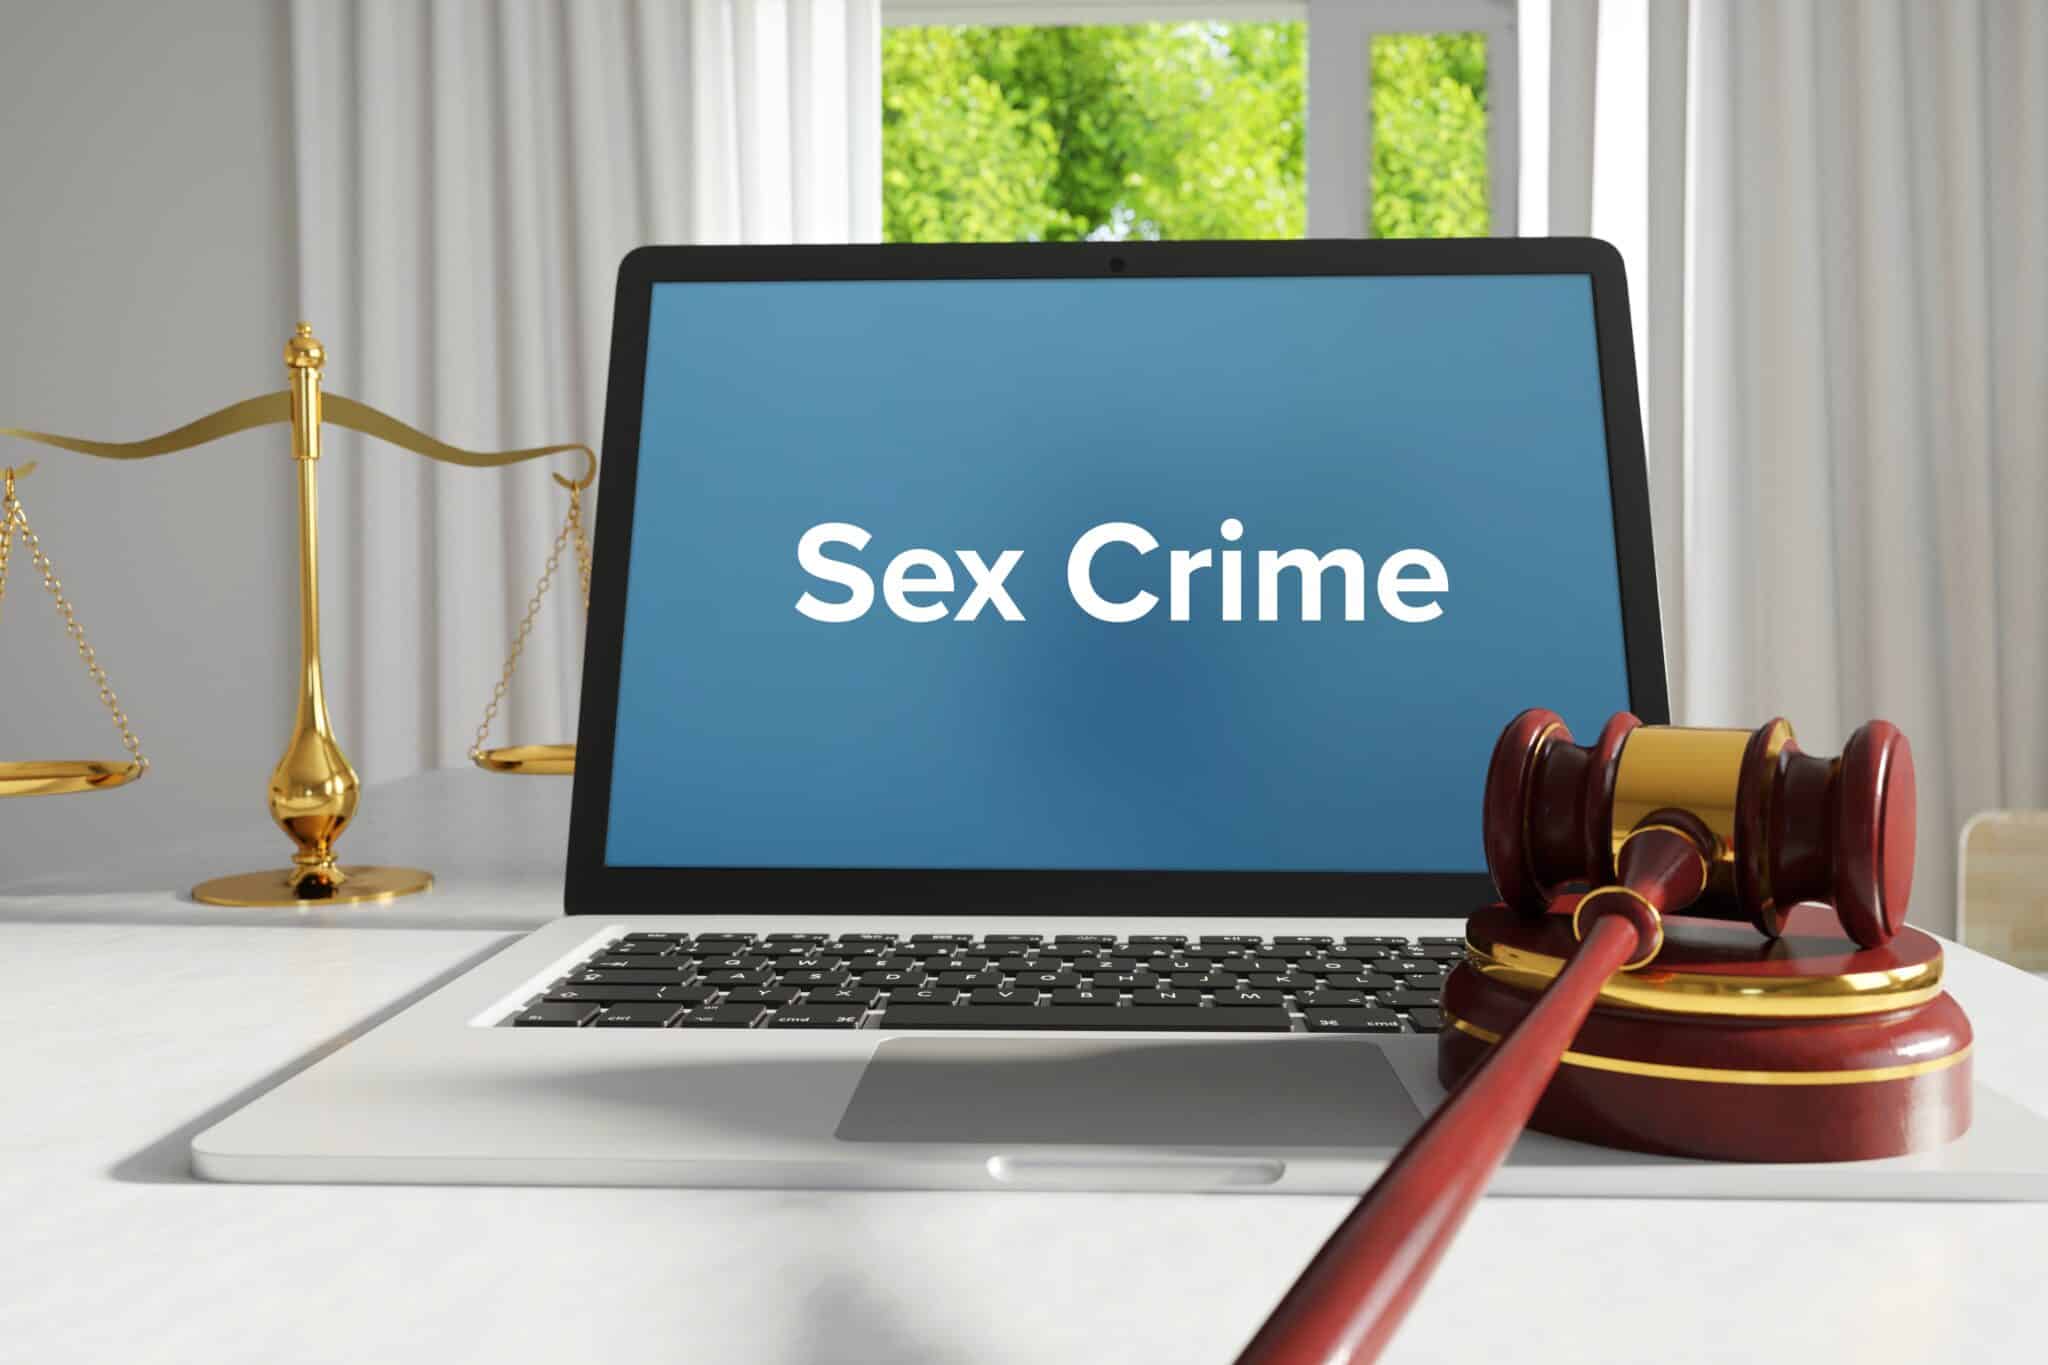 Sex Crime – Law, Judgment, Web. Laptop in the office with term